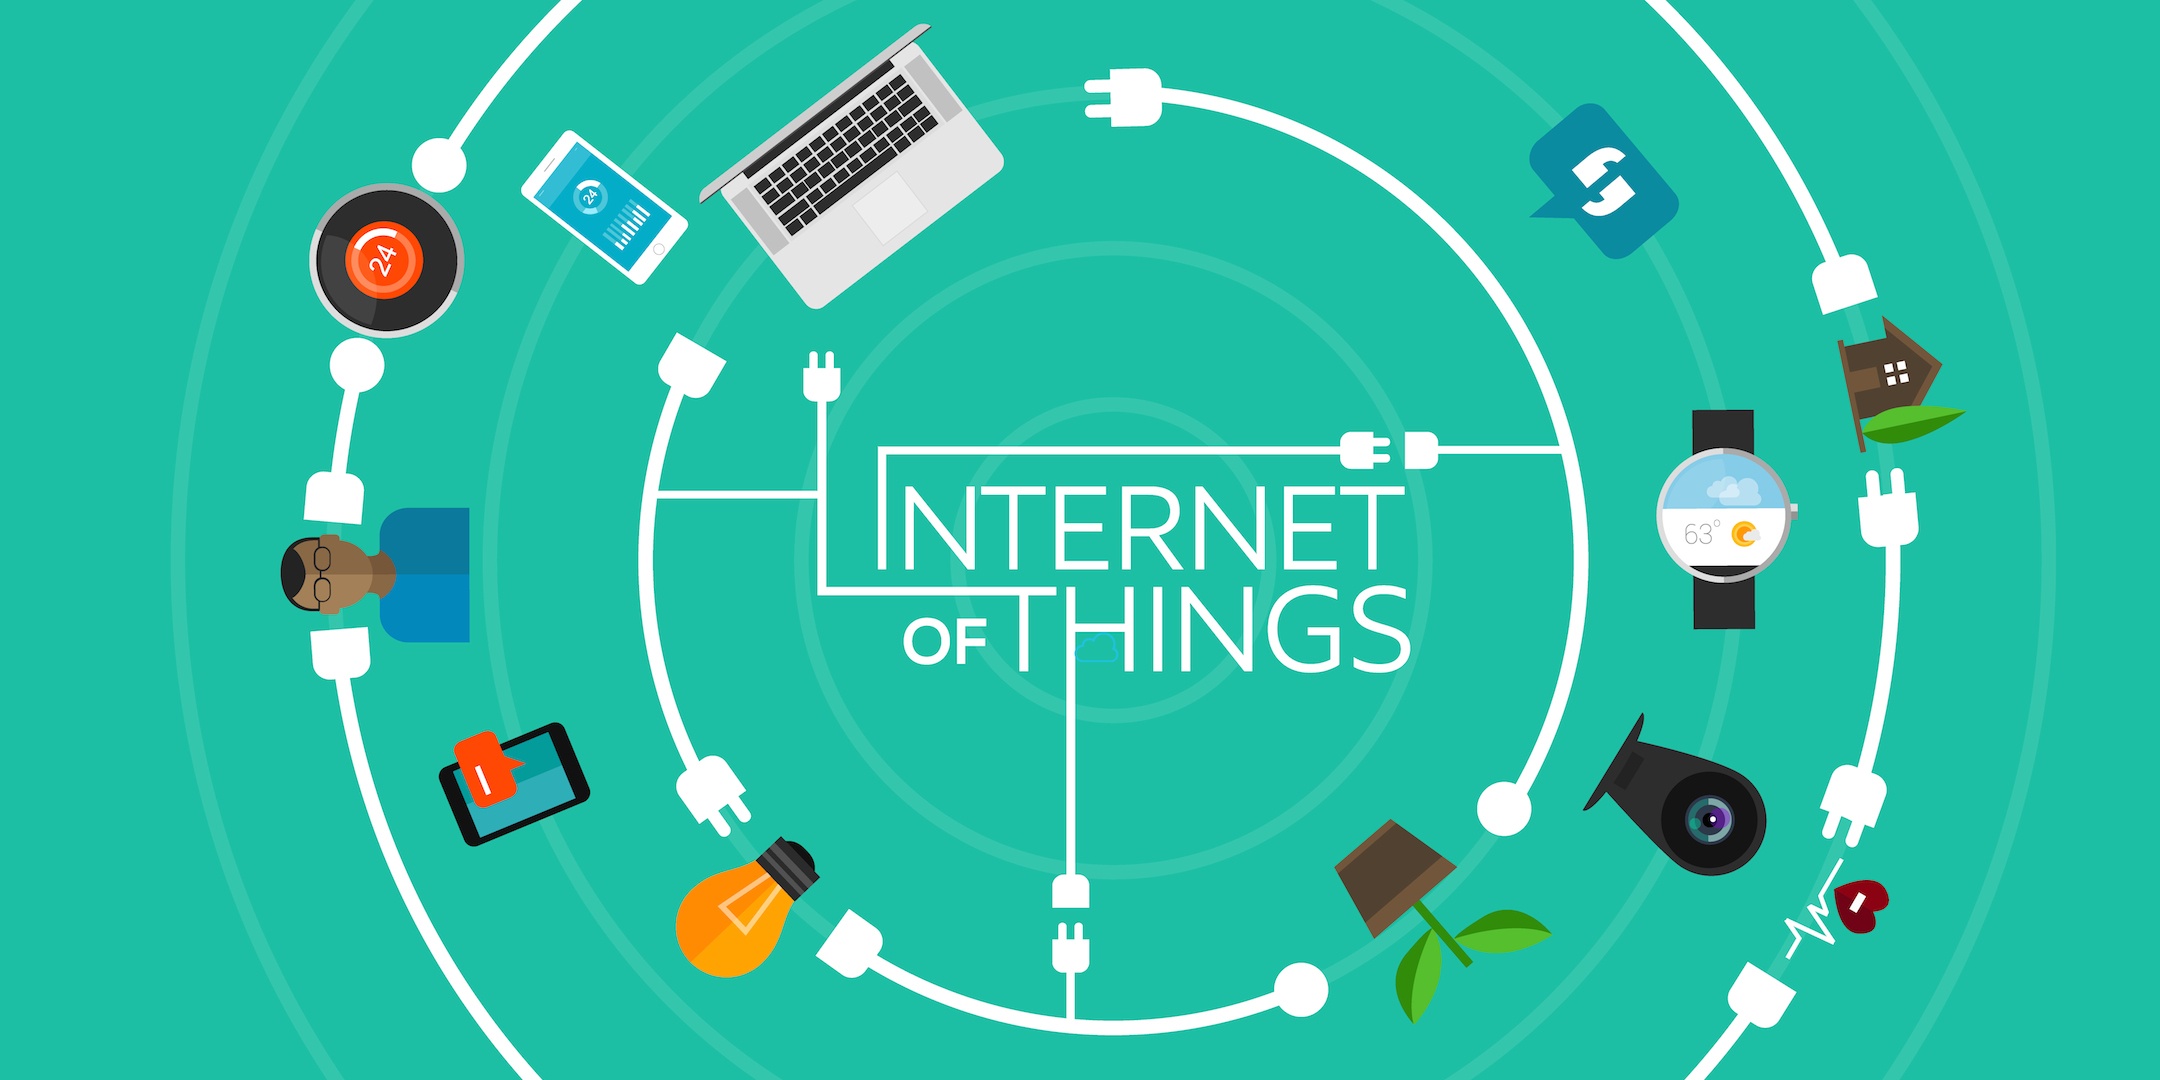 13 IoT Statistics Defining the Future of Internet of Things